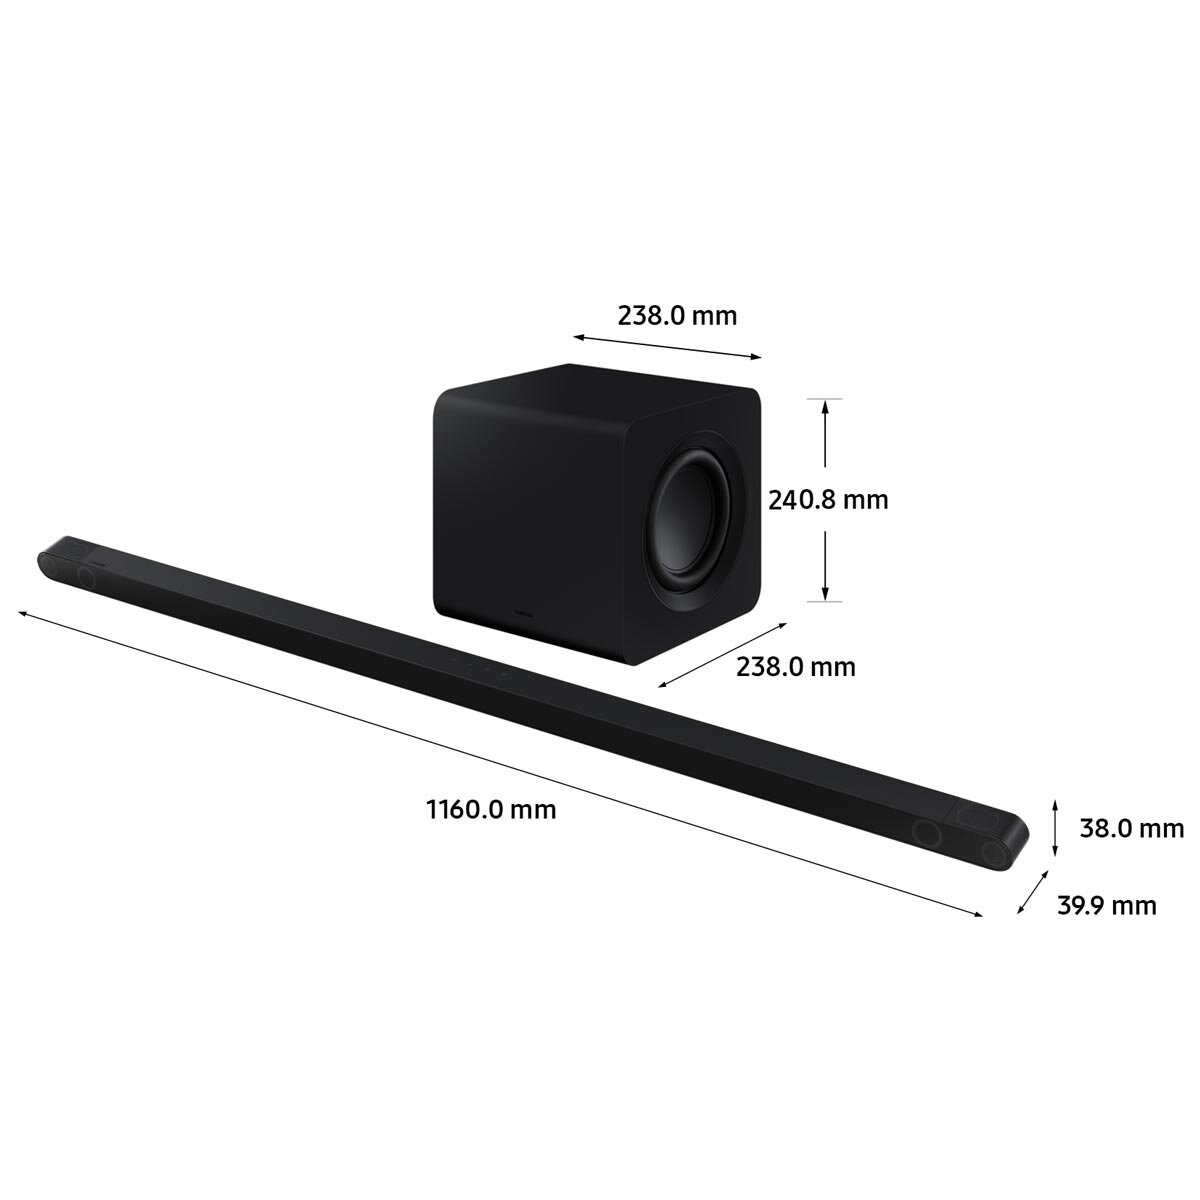 Buy Samsung HW-S800B, 3.1.2 Ch, XW, Soundbar and Wireless Subwoofer with Bluetooth and DTS:X HW-S800B/XU at costco.co.uk